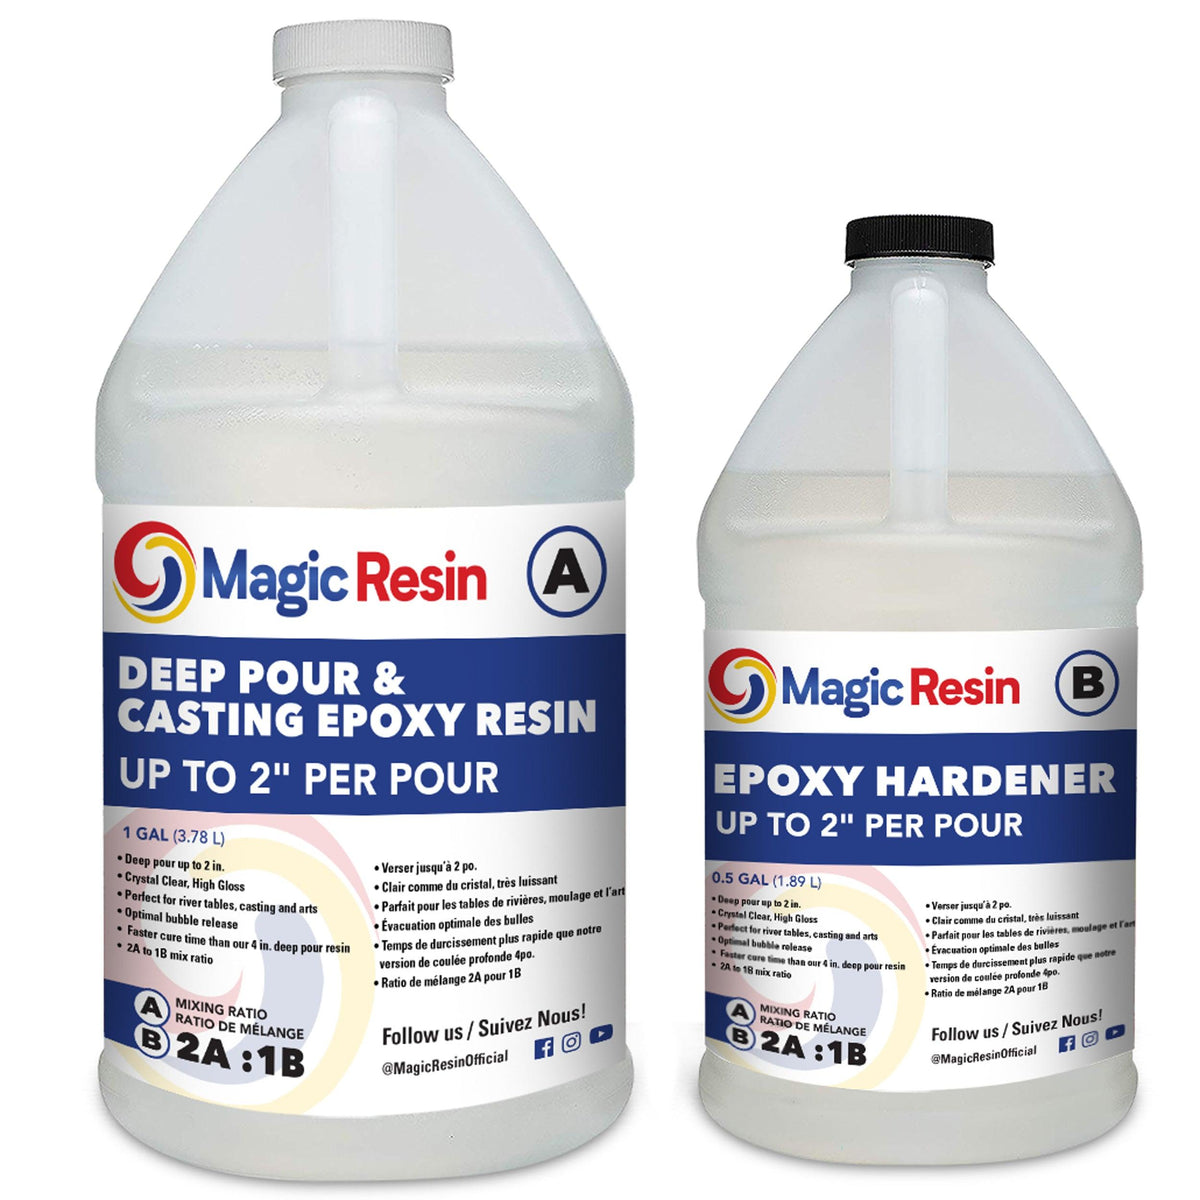 Can makers magic really harden enough to use as a resin